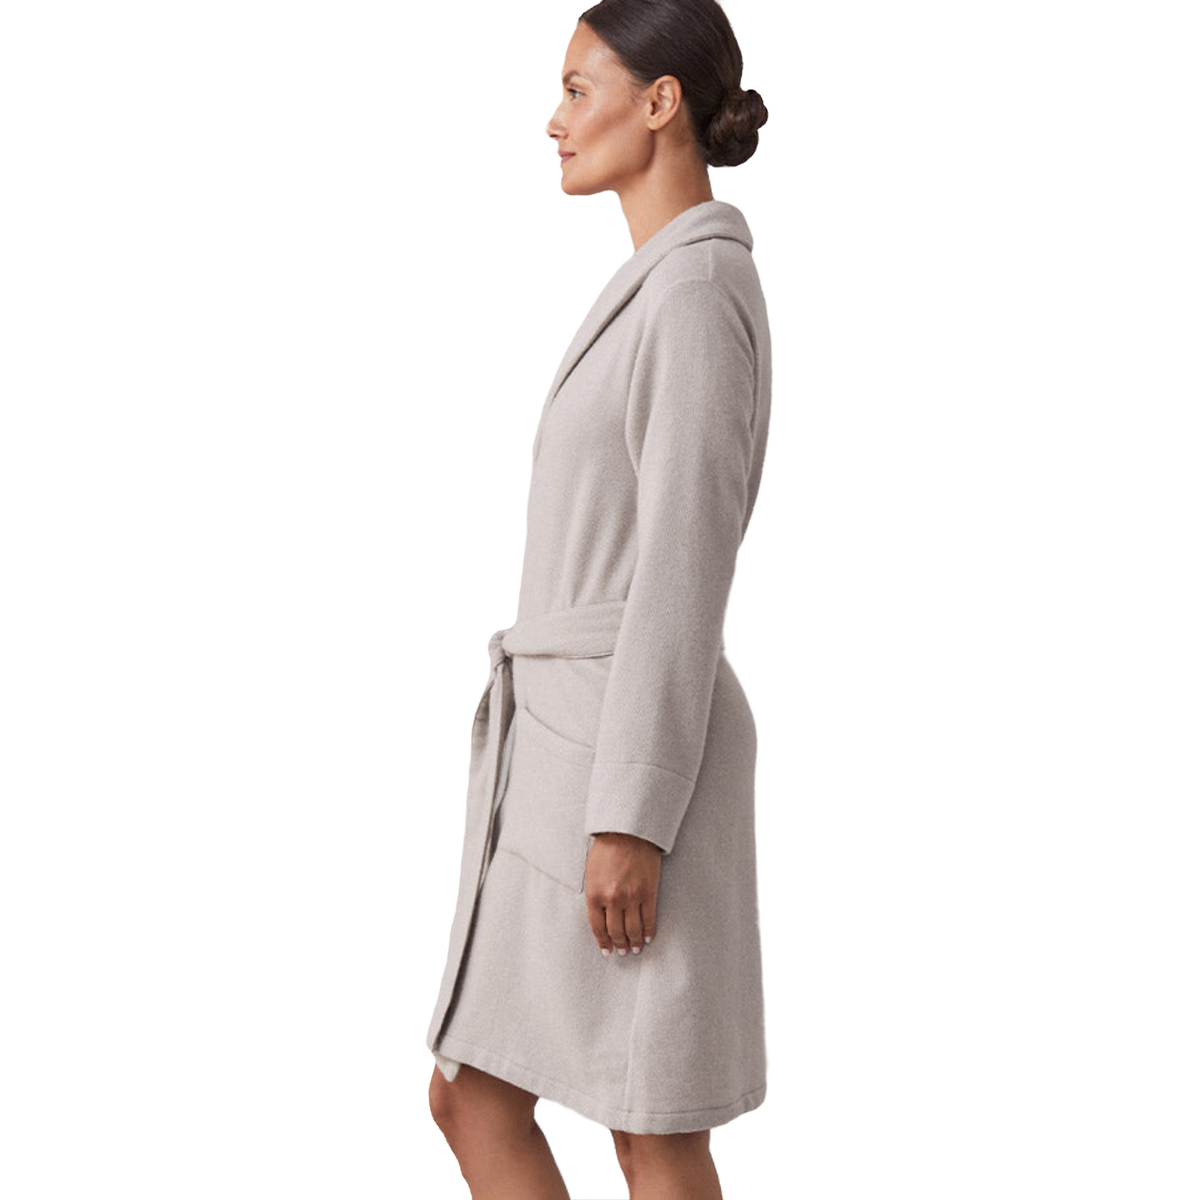 Side View of Model Wearing of Sferra Sardinia’s Cashmere Robes in Grey Color